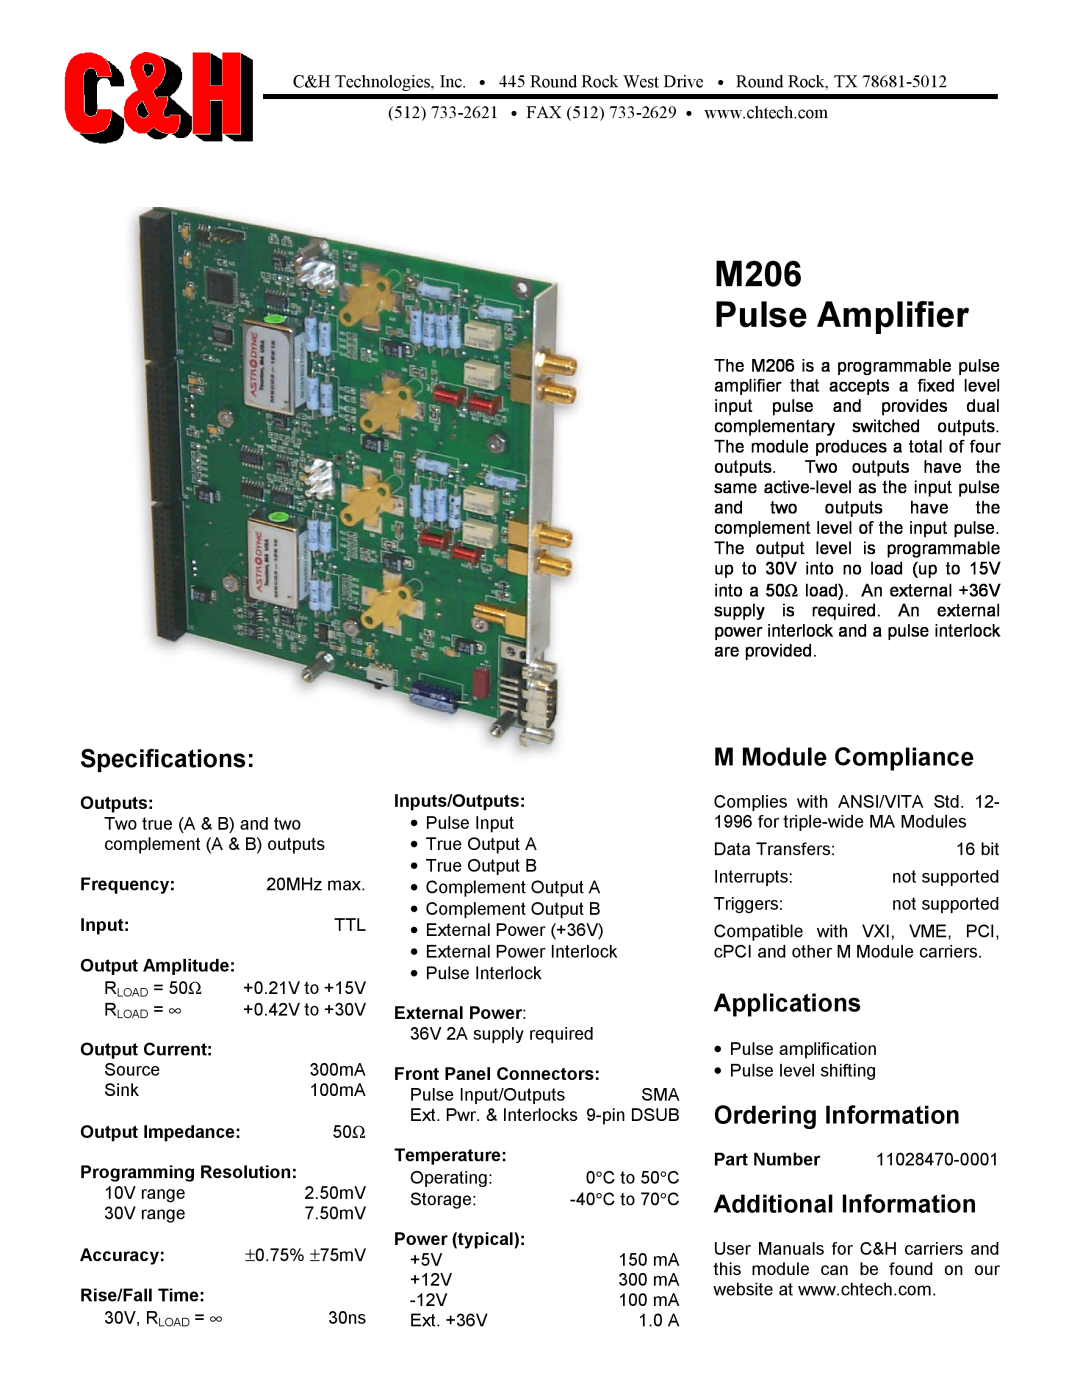 CH Tech specifications M206 Pulse Amplifier, Specifications, M Module Compliance, Applications, Ordering Information 